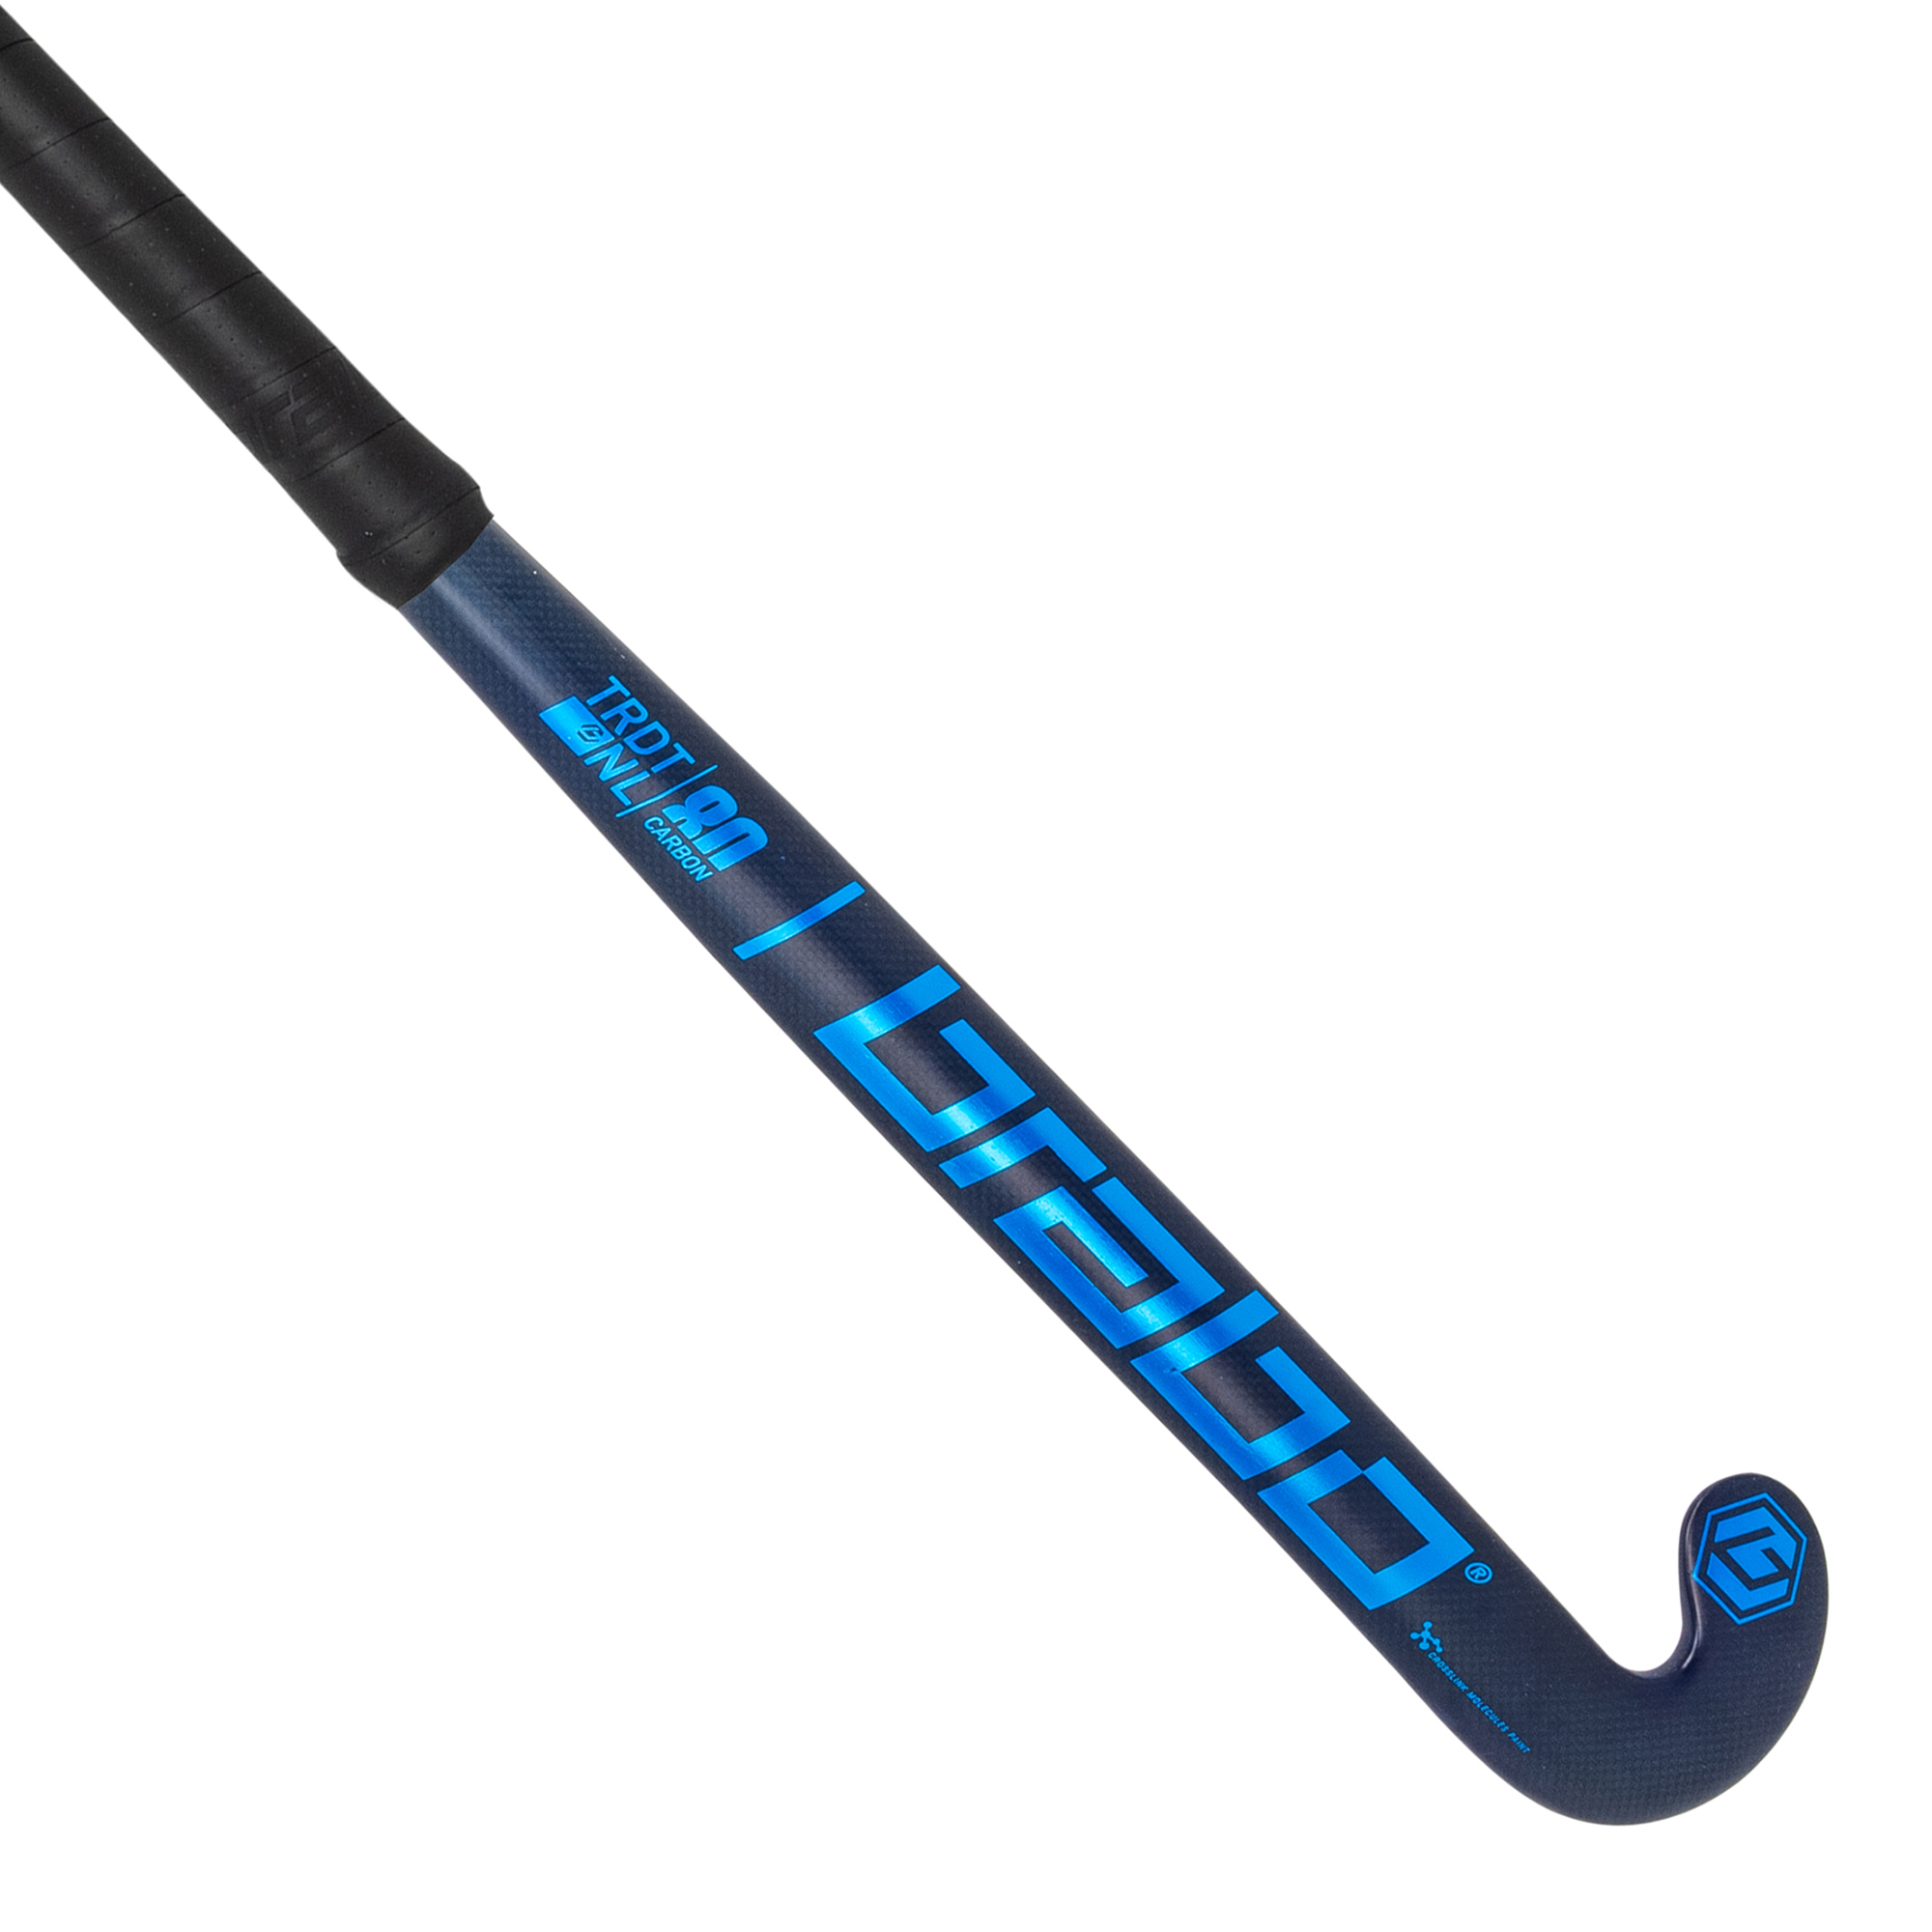 IT Traditional Carbon 80 Classic Curve